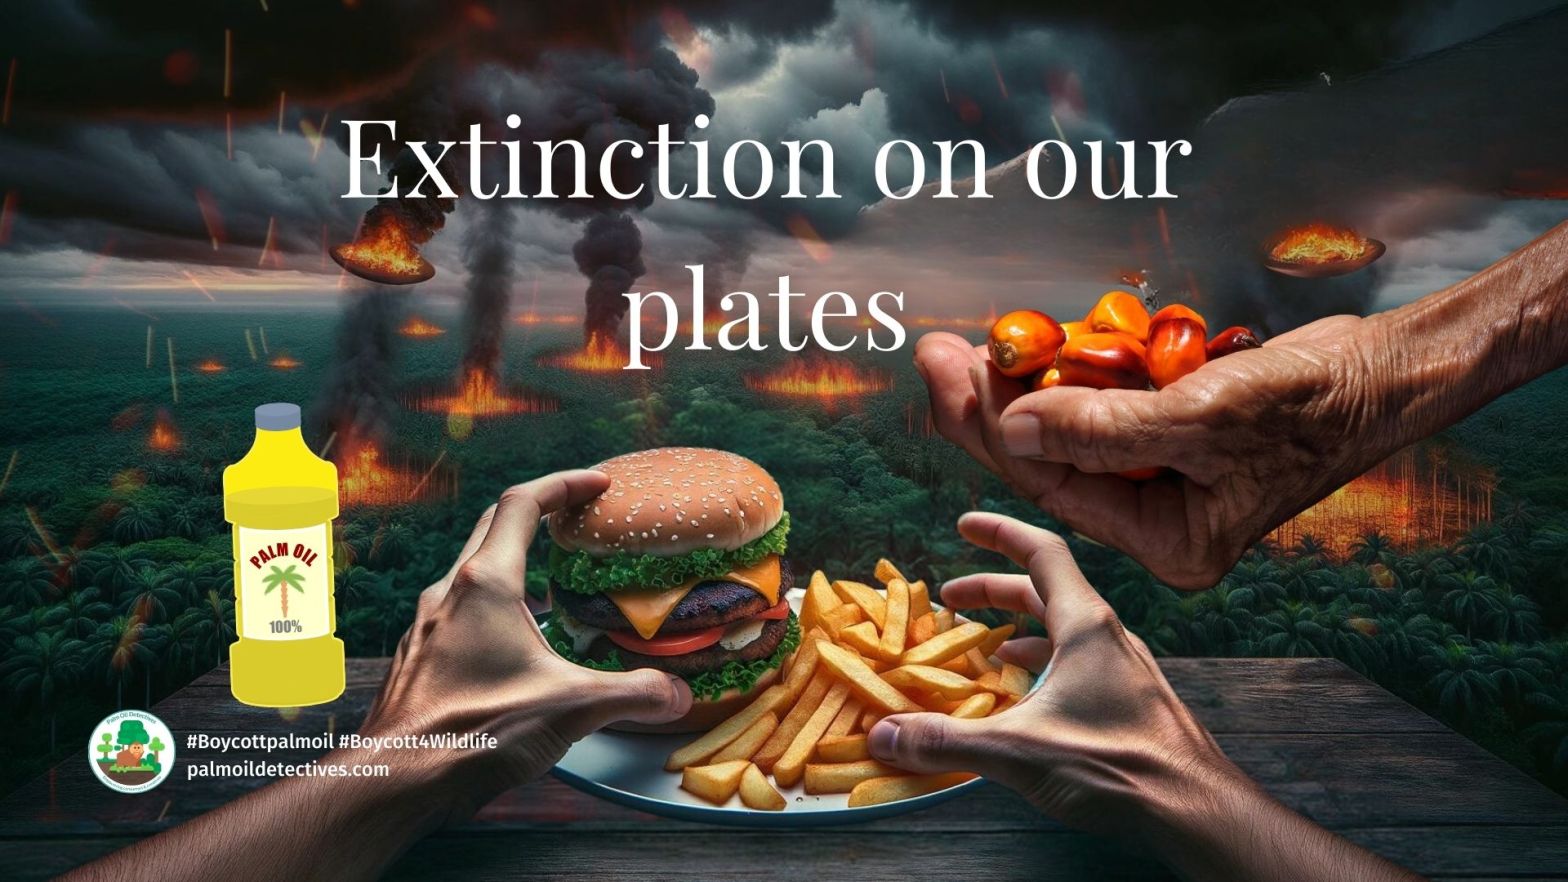 Extinction on our plates